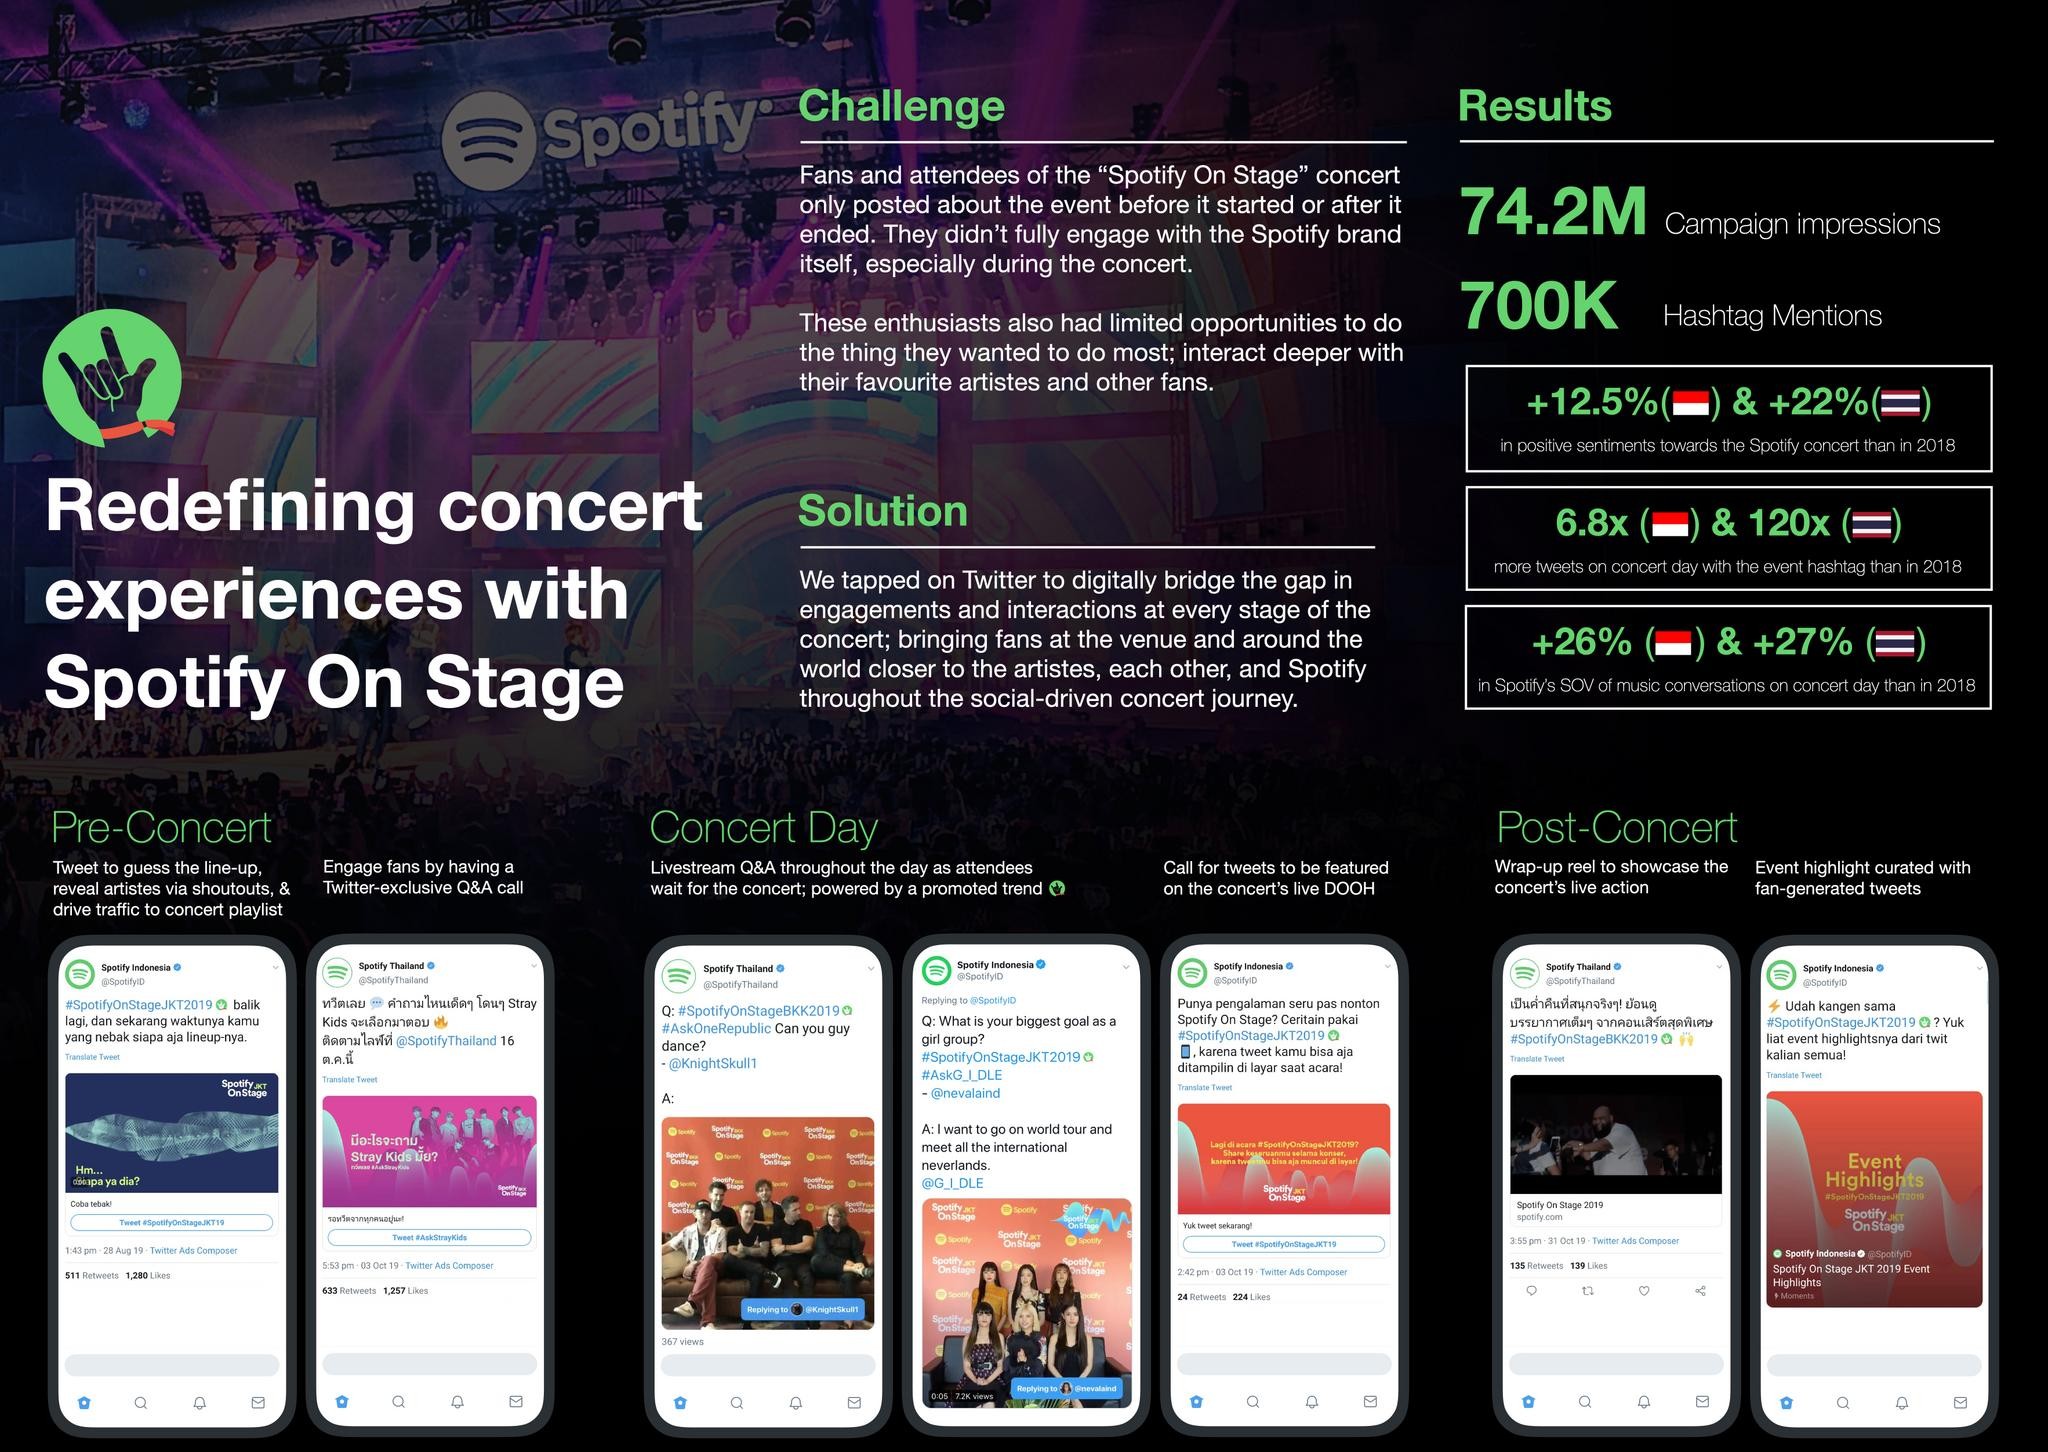 Redefining concert experiences with Spotify On Stage